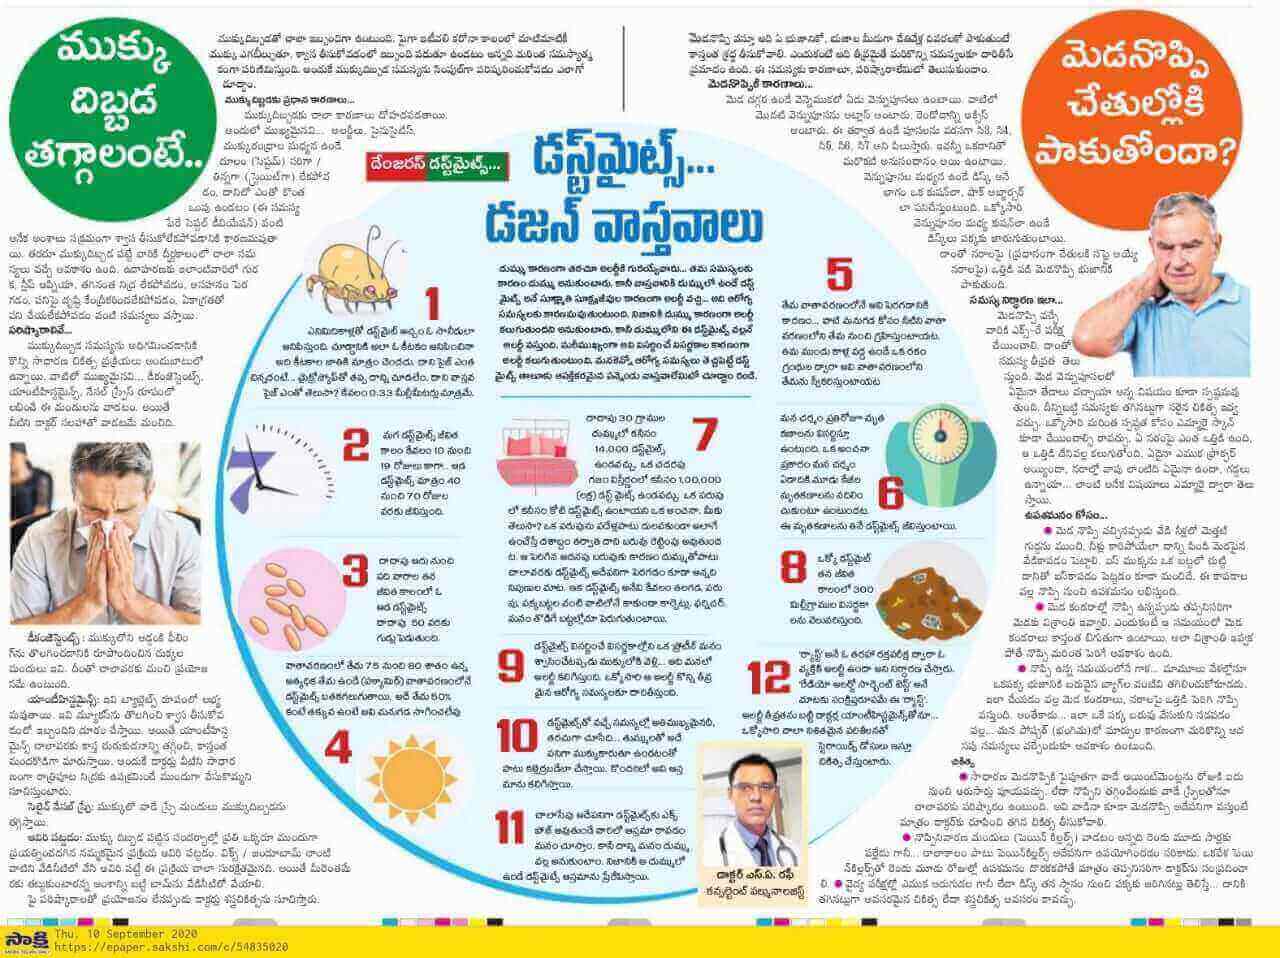 Article on Dustmites by Dr. S A Rafi Consultant Pulmonologist